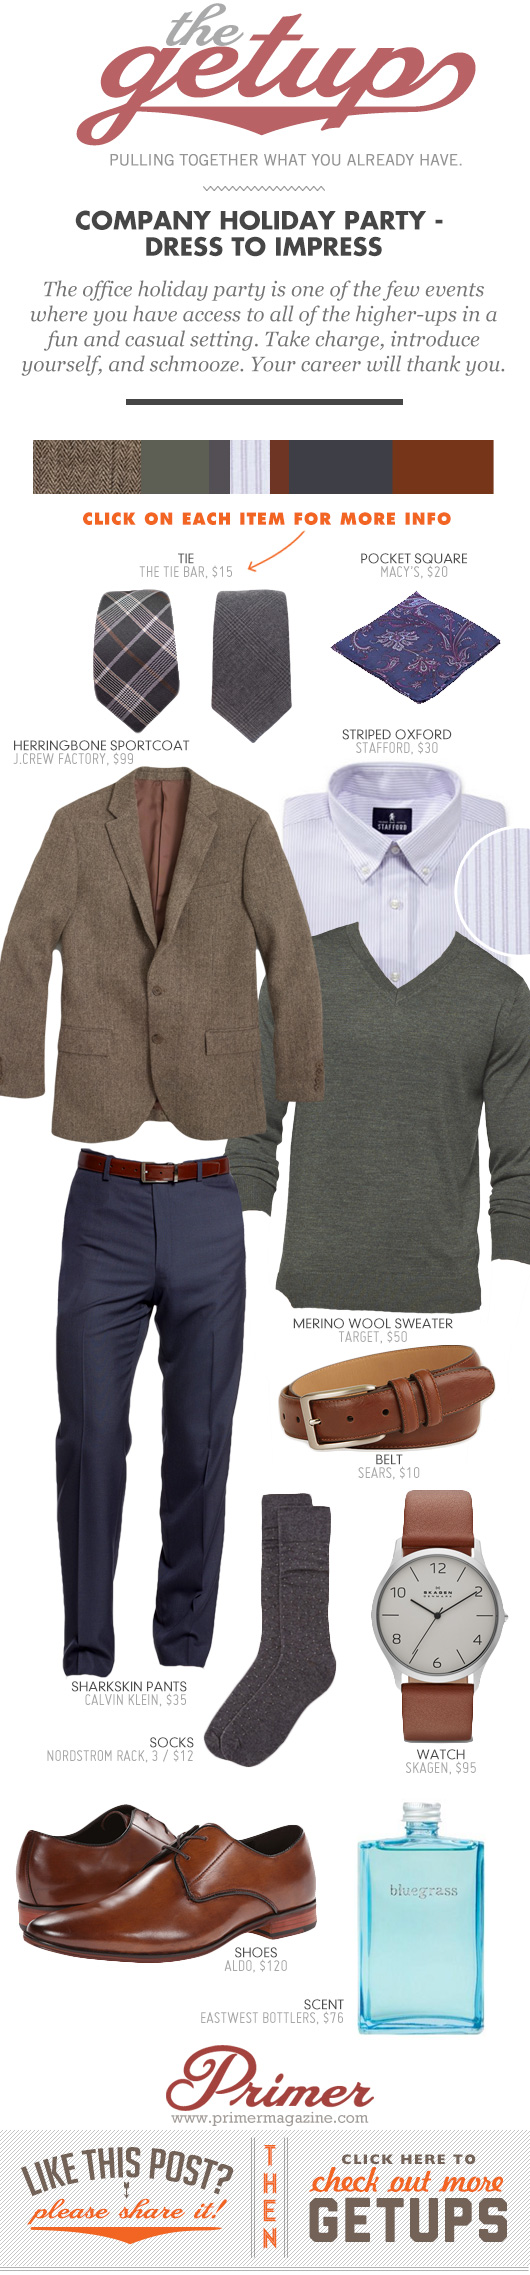 Getup - Holiday company party - brown blazer, green sweater, blue pants